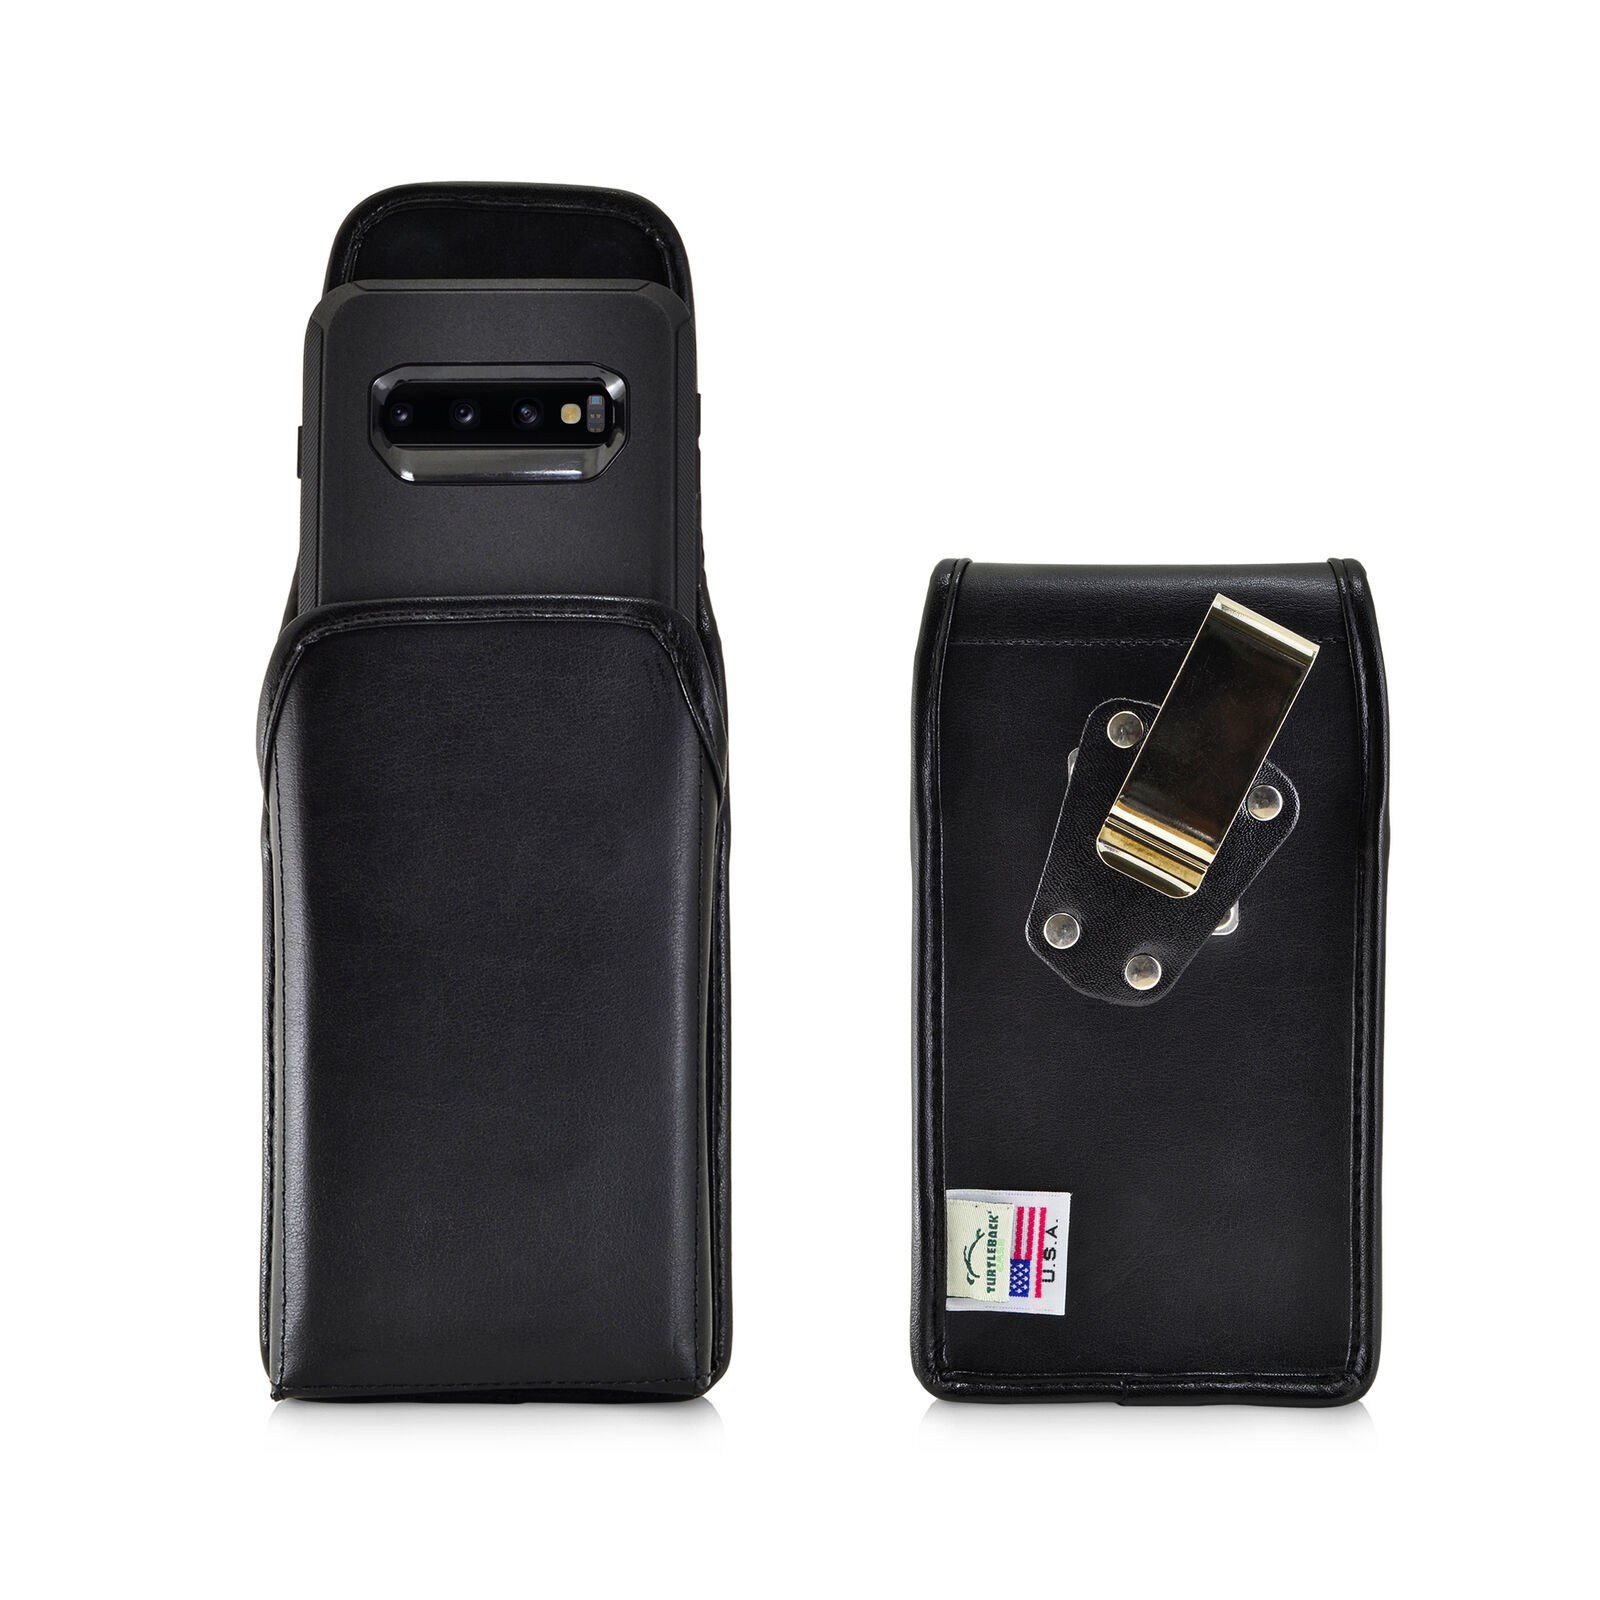 Primary image for Holster fits Galaxy S10 with OTTERBOX DEFENDER Vertical Black Leather Clip